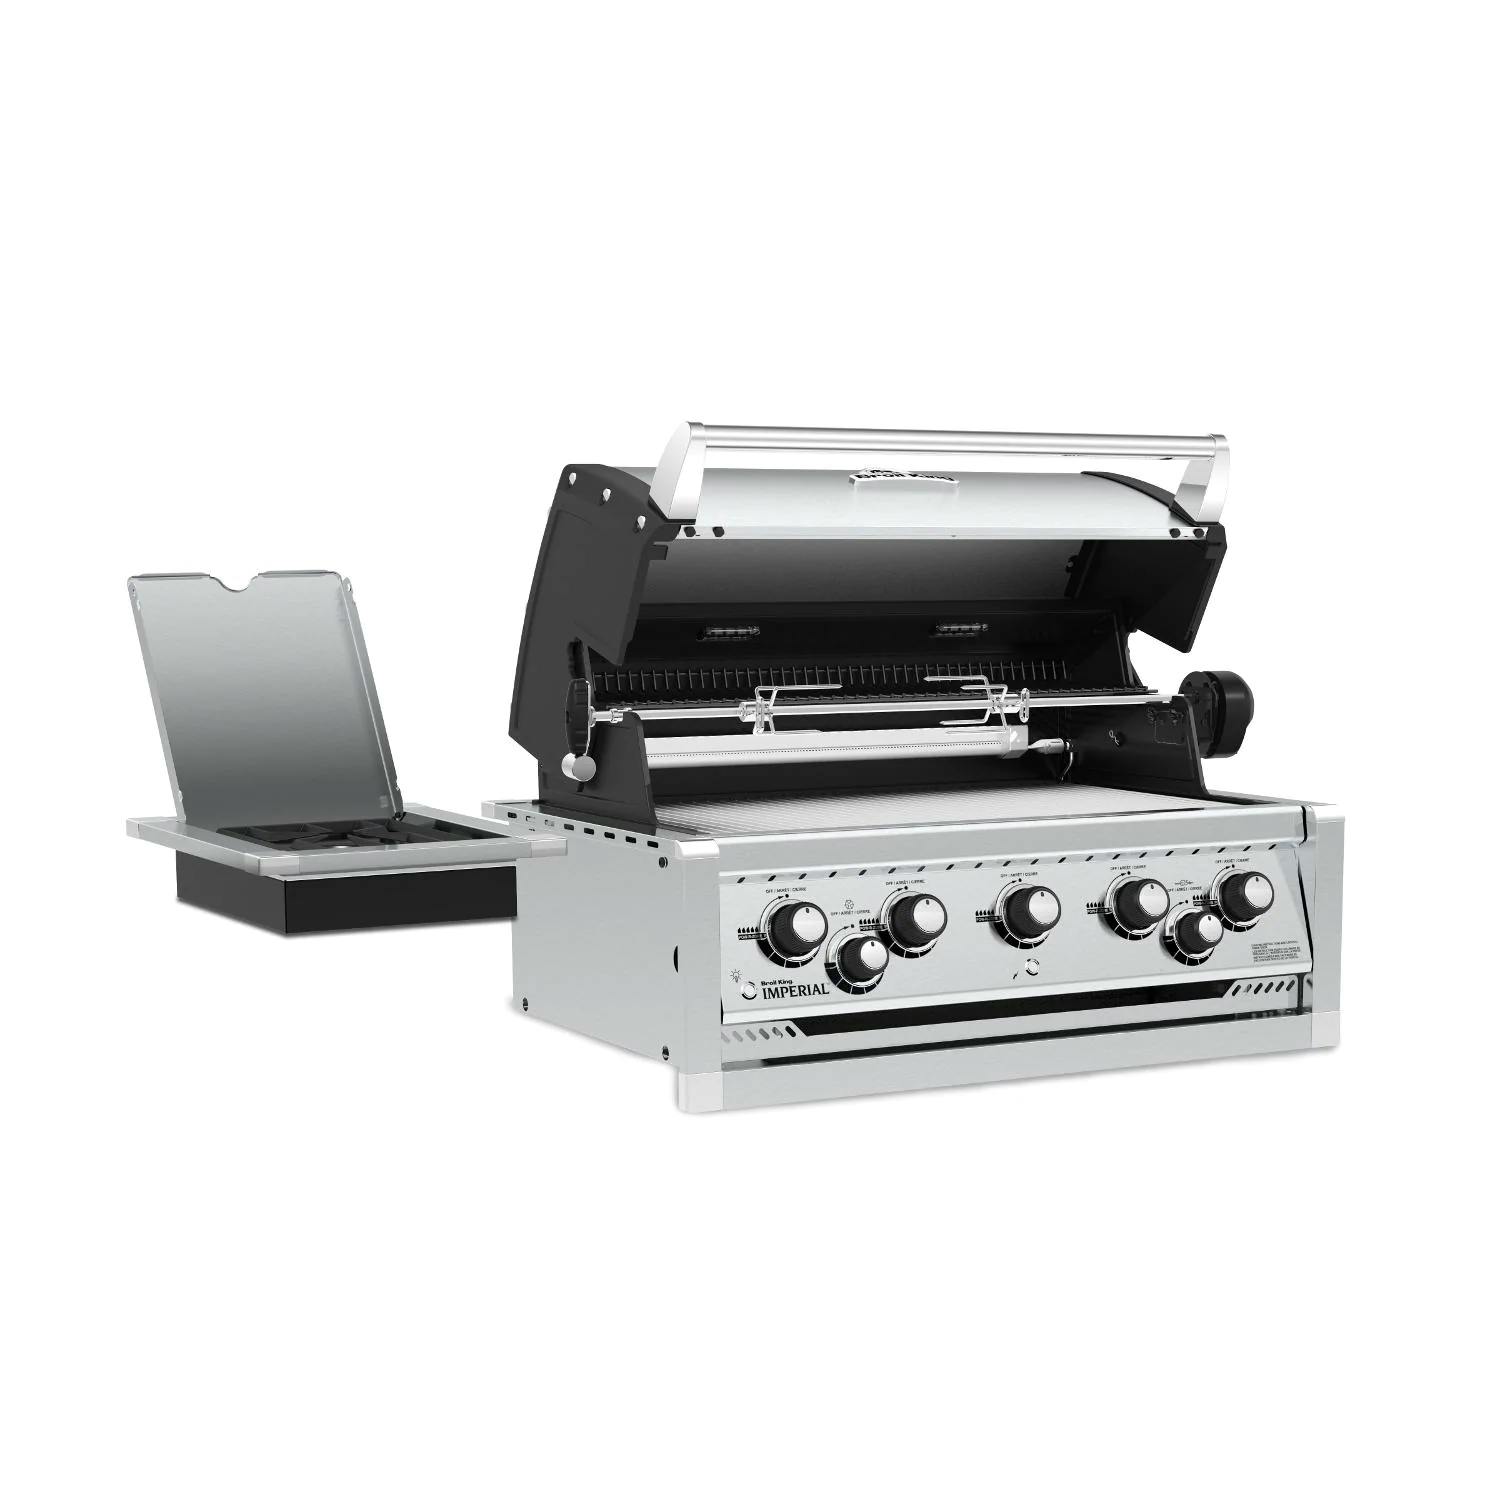 Broil King Imperial 590 Built-in Gas Grill with Rotisserie and Side Burner